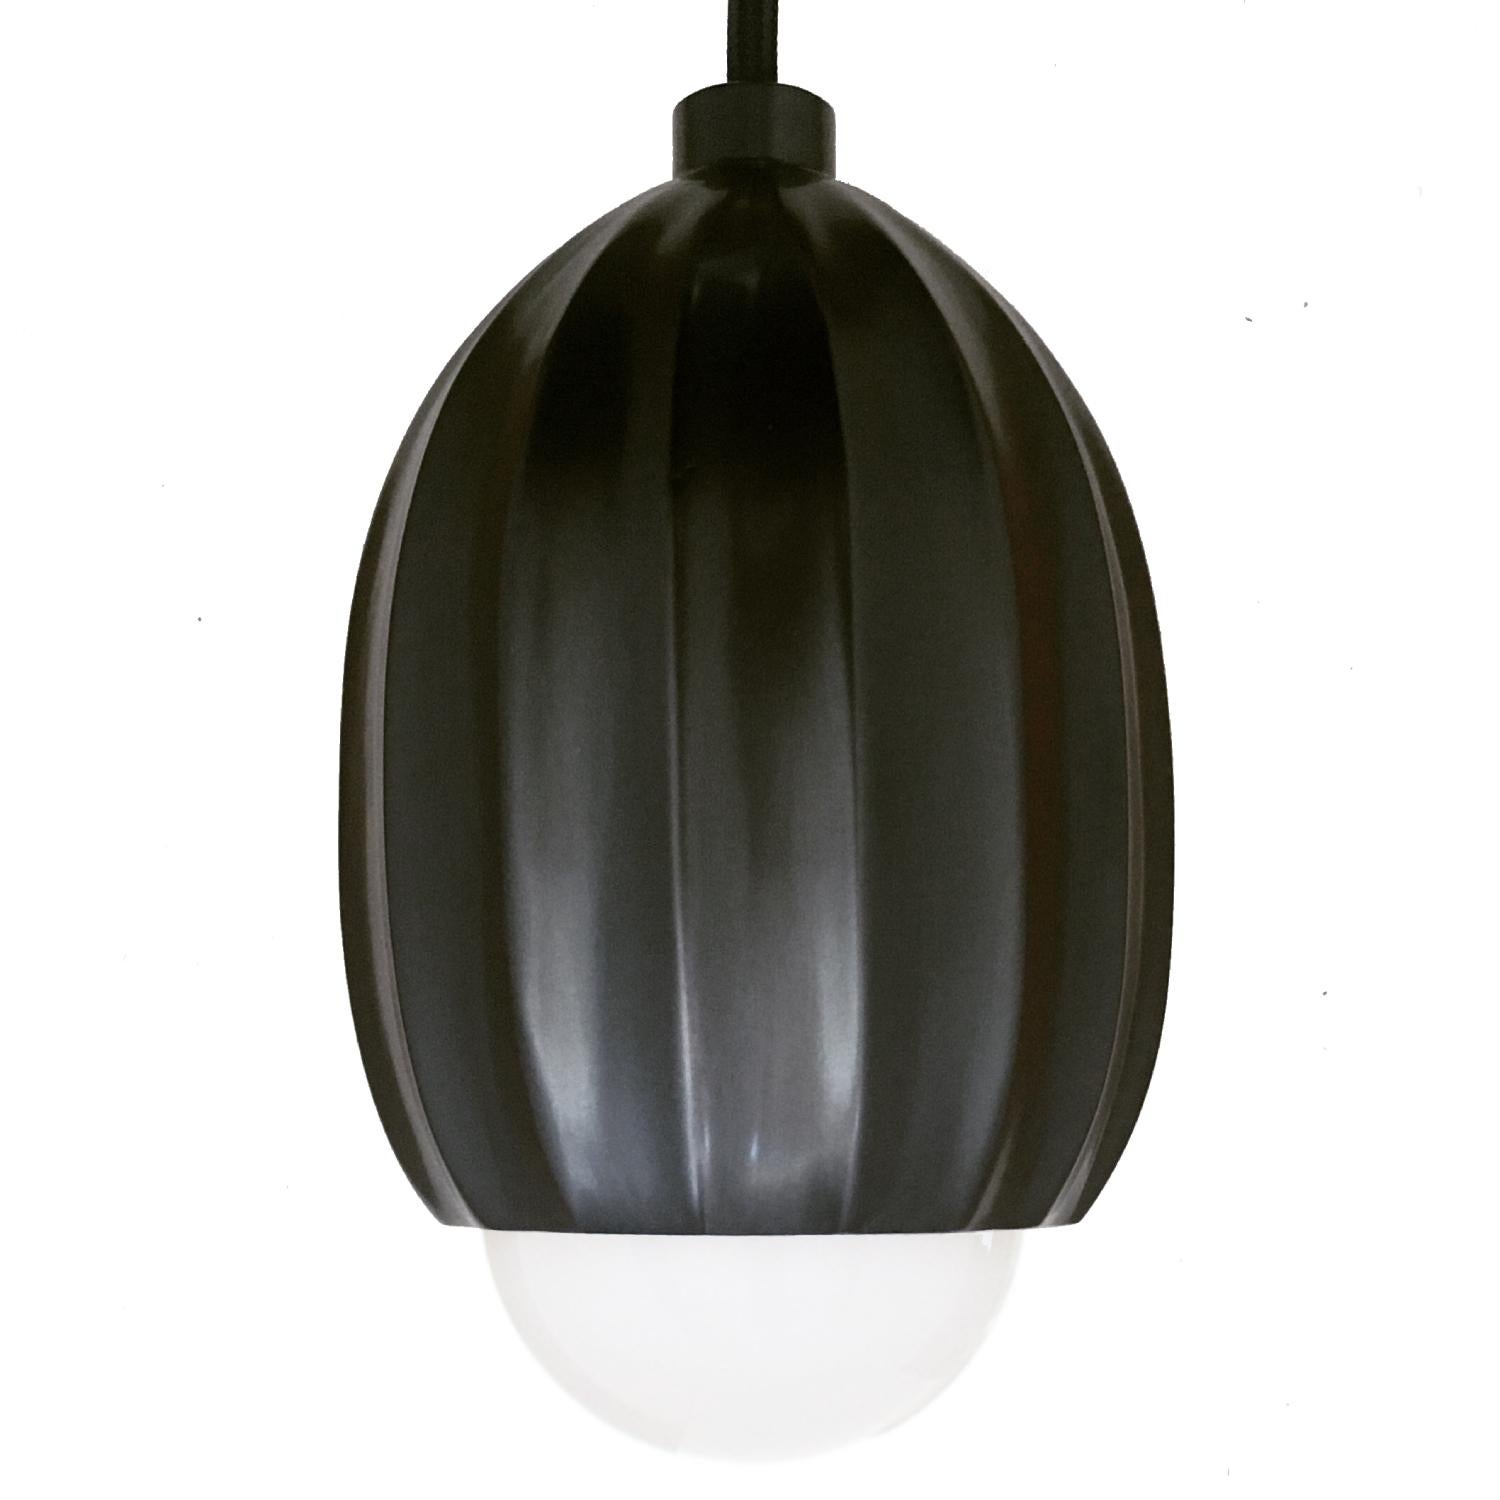 Poppy Blackened Brass Pendant Lamp by Fred and Juul
Dimensions: Ø 10 x D 300 cm.
Materials: Blackened brass.

Available in polished brass or blackened brass. Cord length can be extended on request. Custom sizes, materials or finishes are available